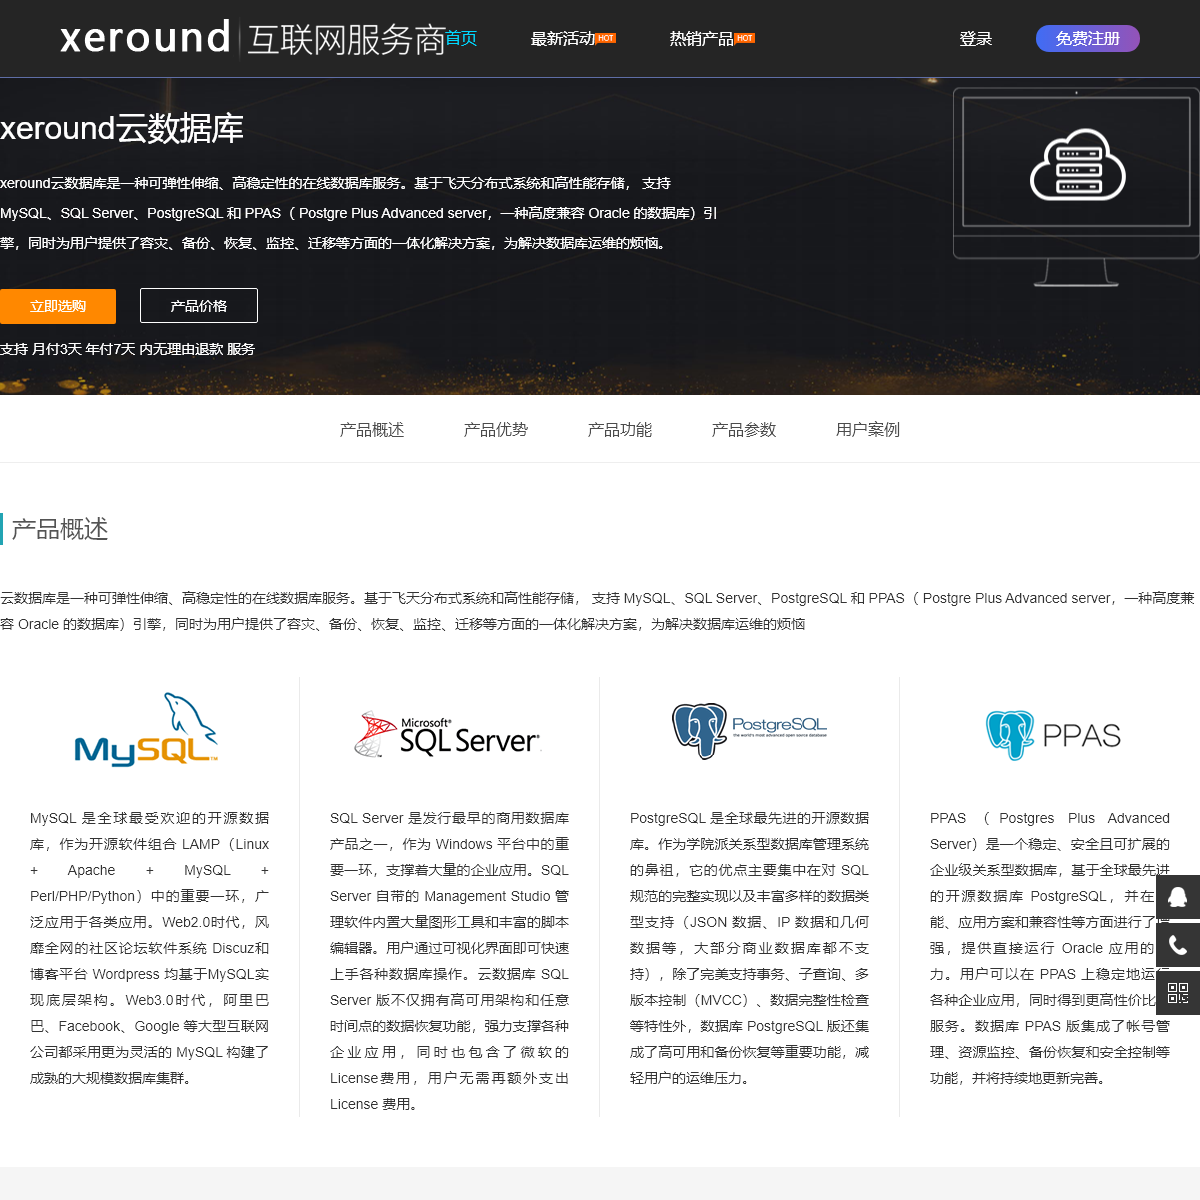 A complete backup of xeround.com